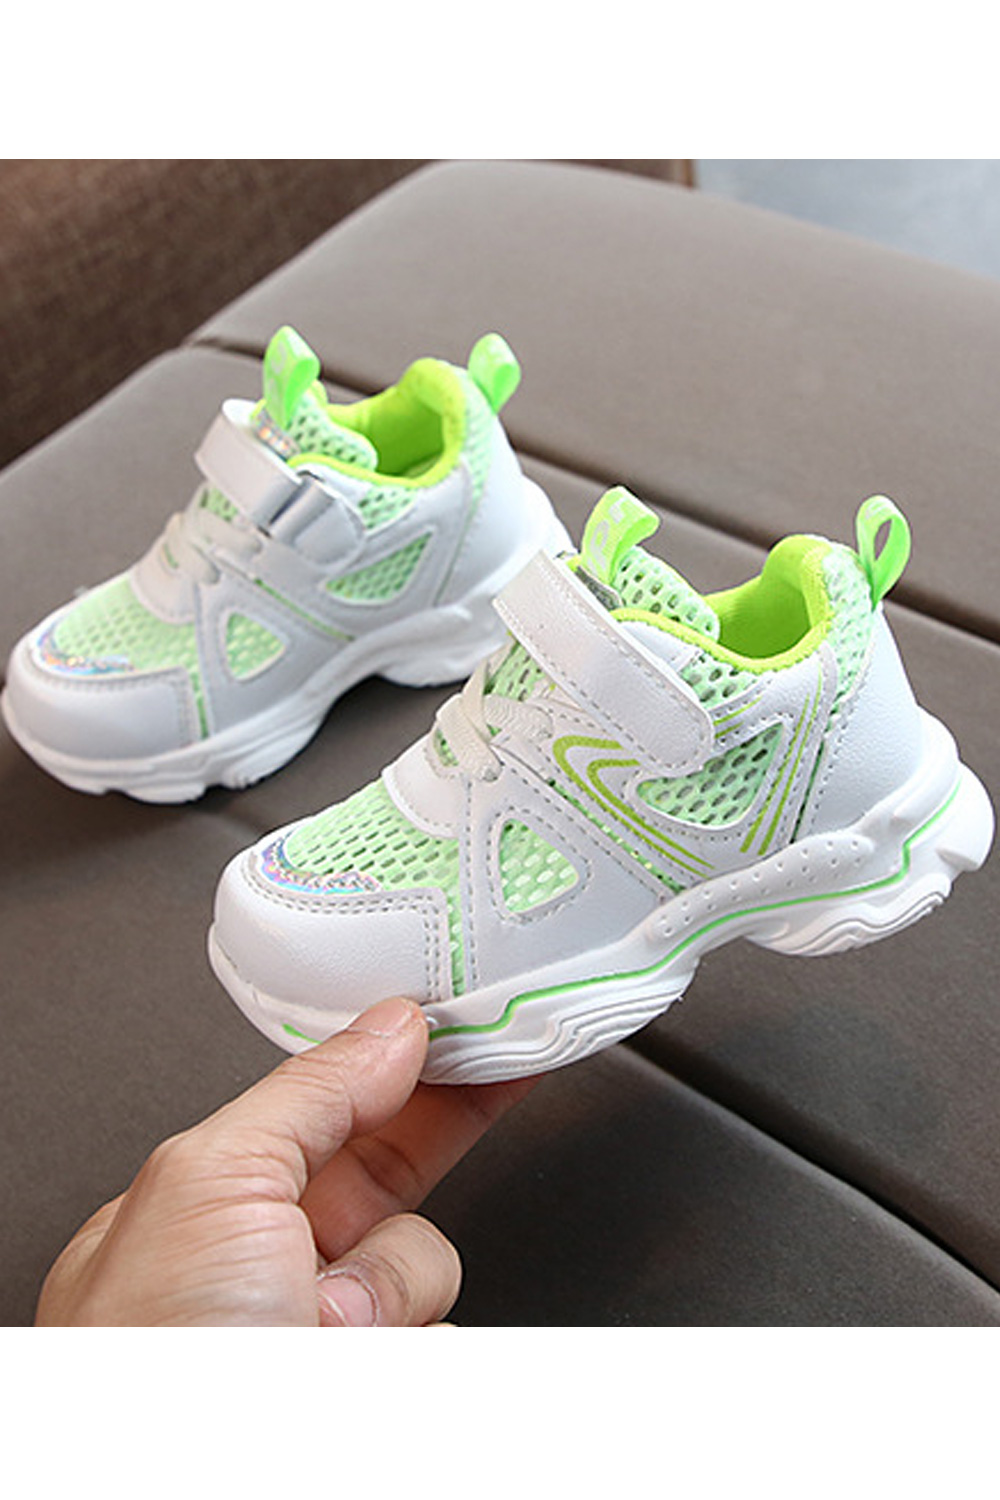 Selected Color is 2008 fluorescent net shoes green